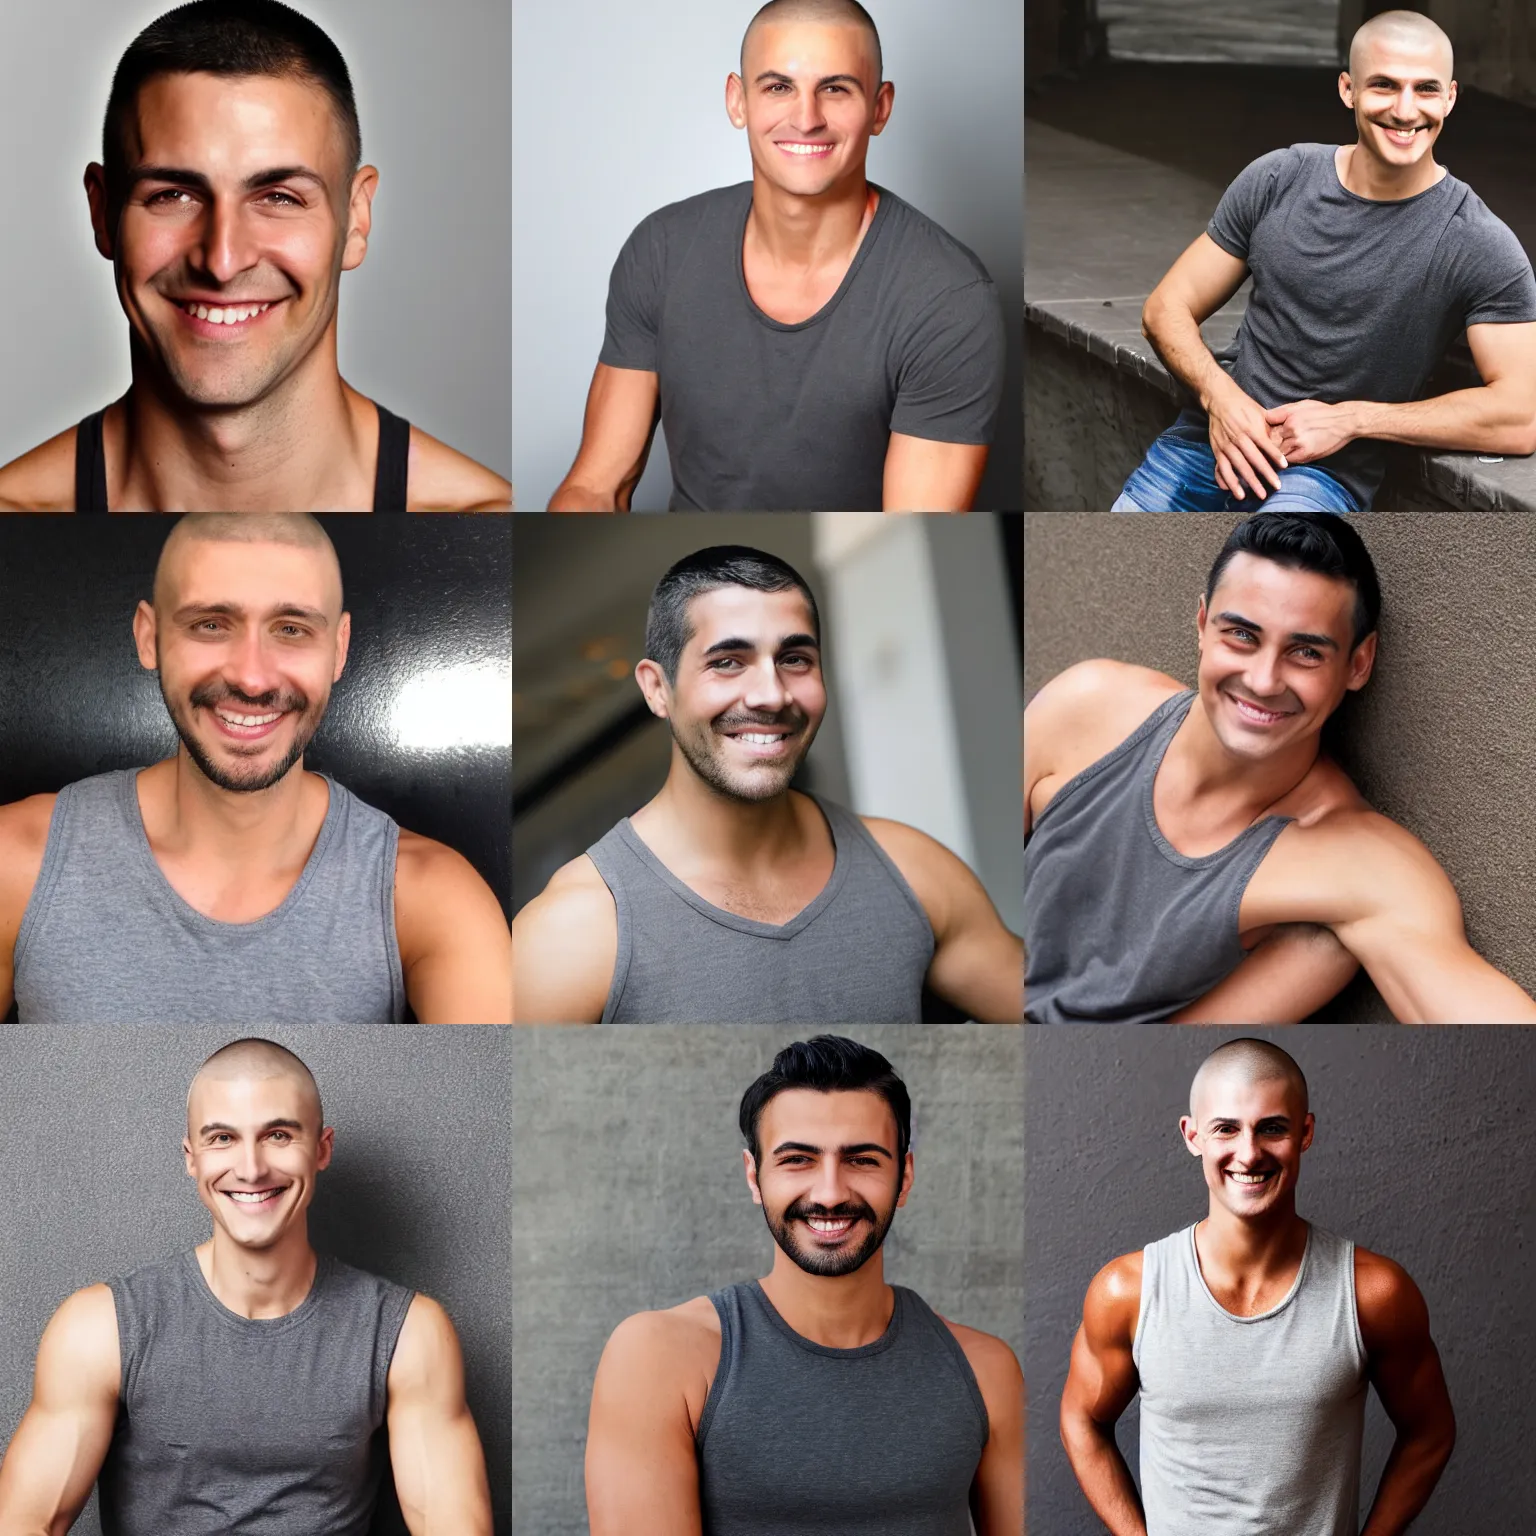 Prompt: tanned masculine woman, with buzzcut dark hair, grey tank top, passeport picture smiling